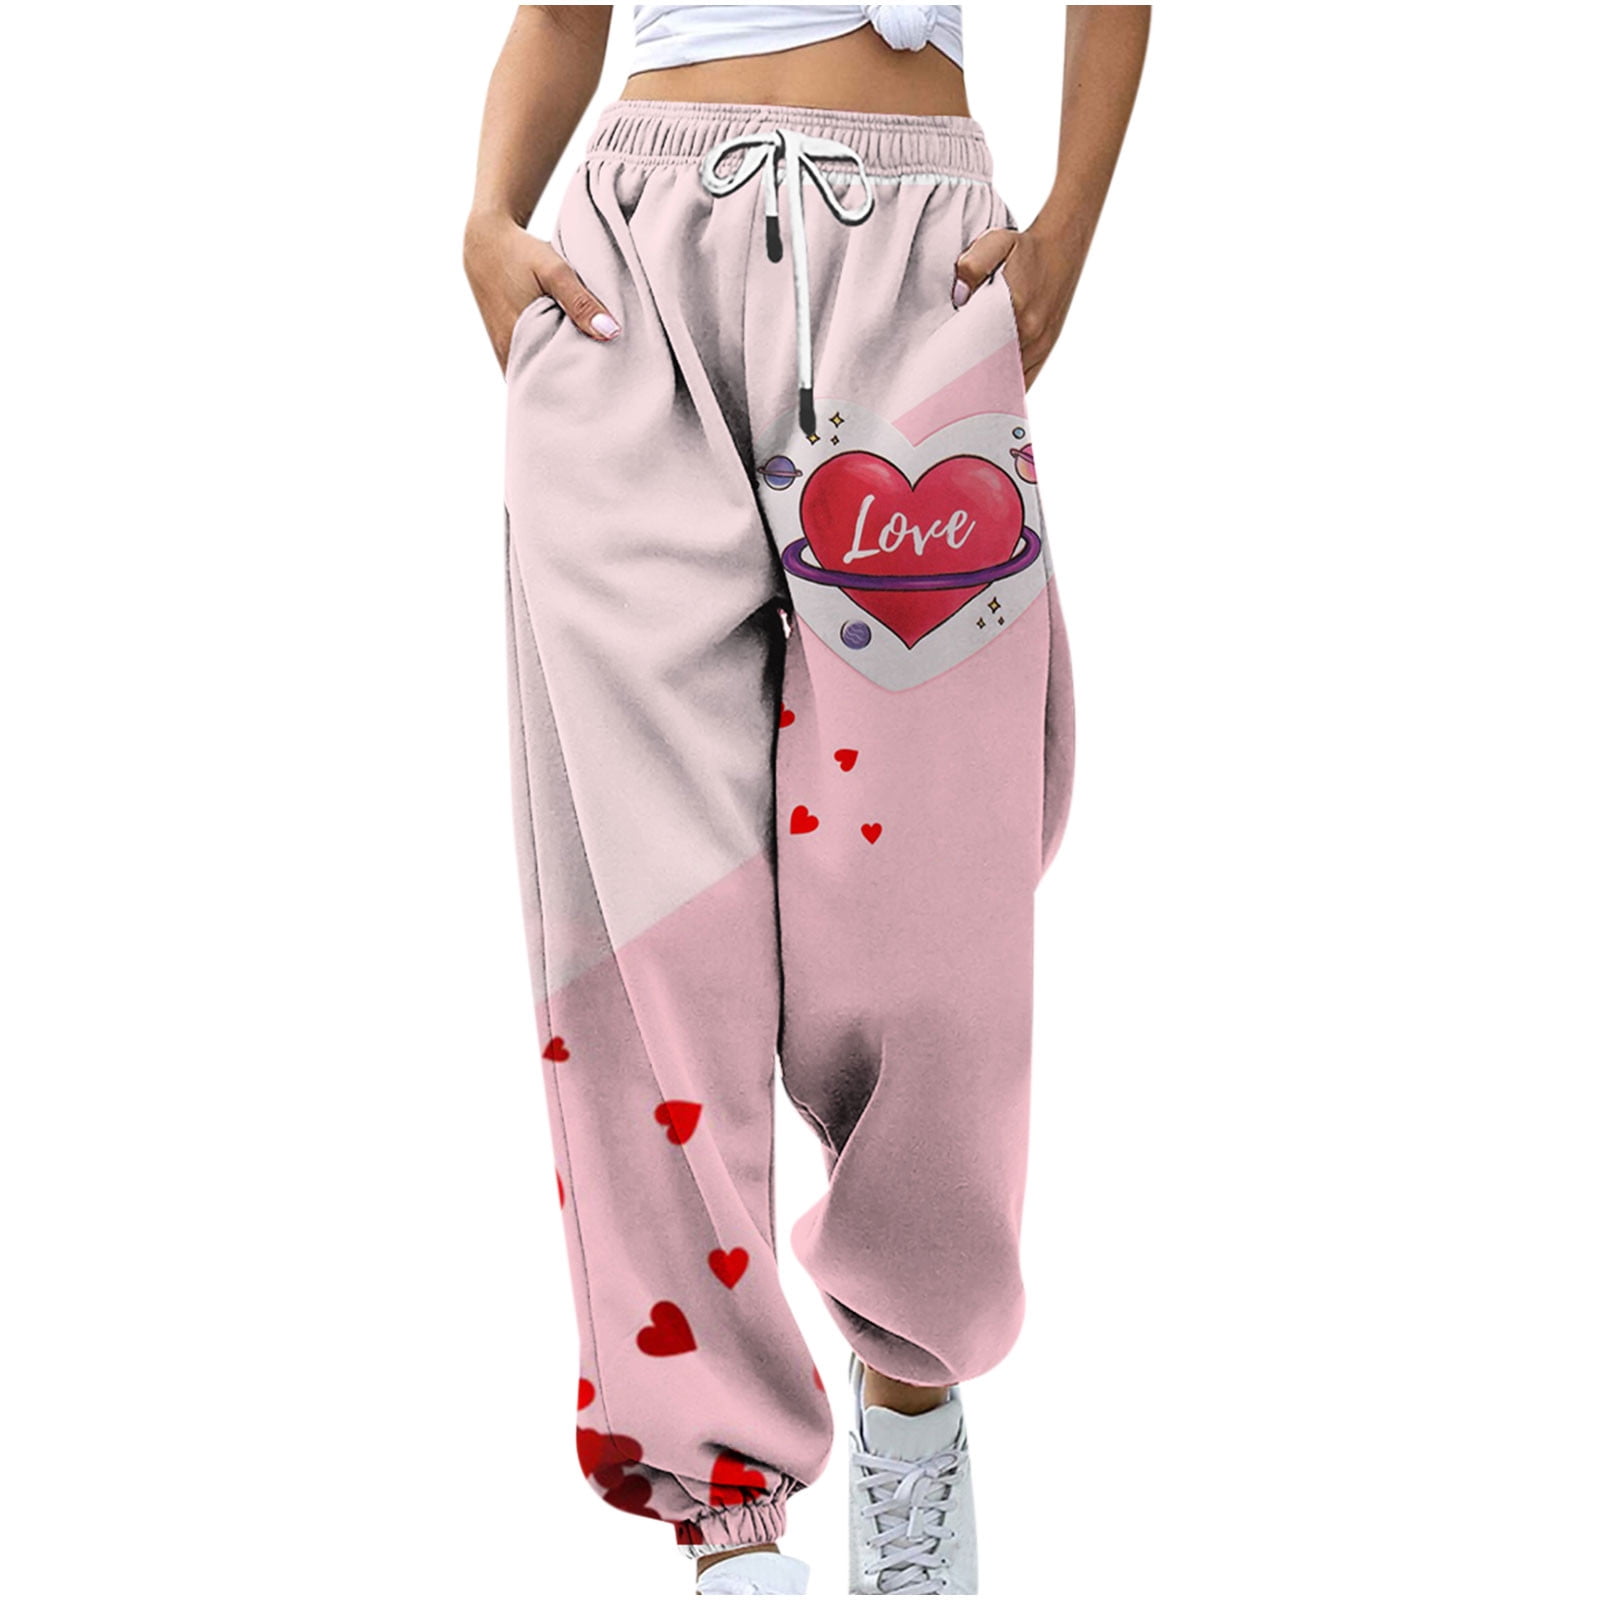 HTNBO Valentine's Day Sweatpants Graphic for Women Drawstring Love